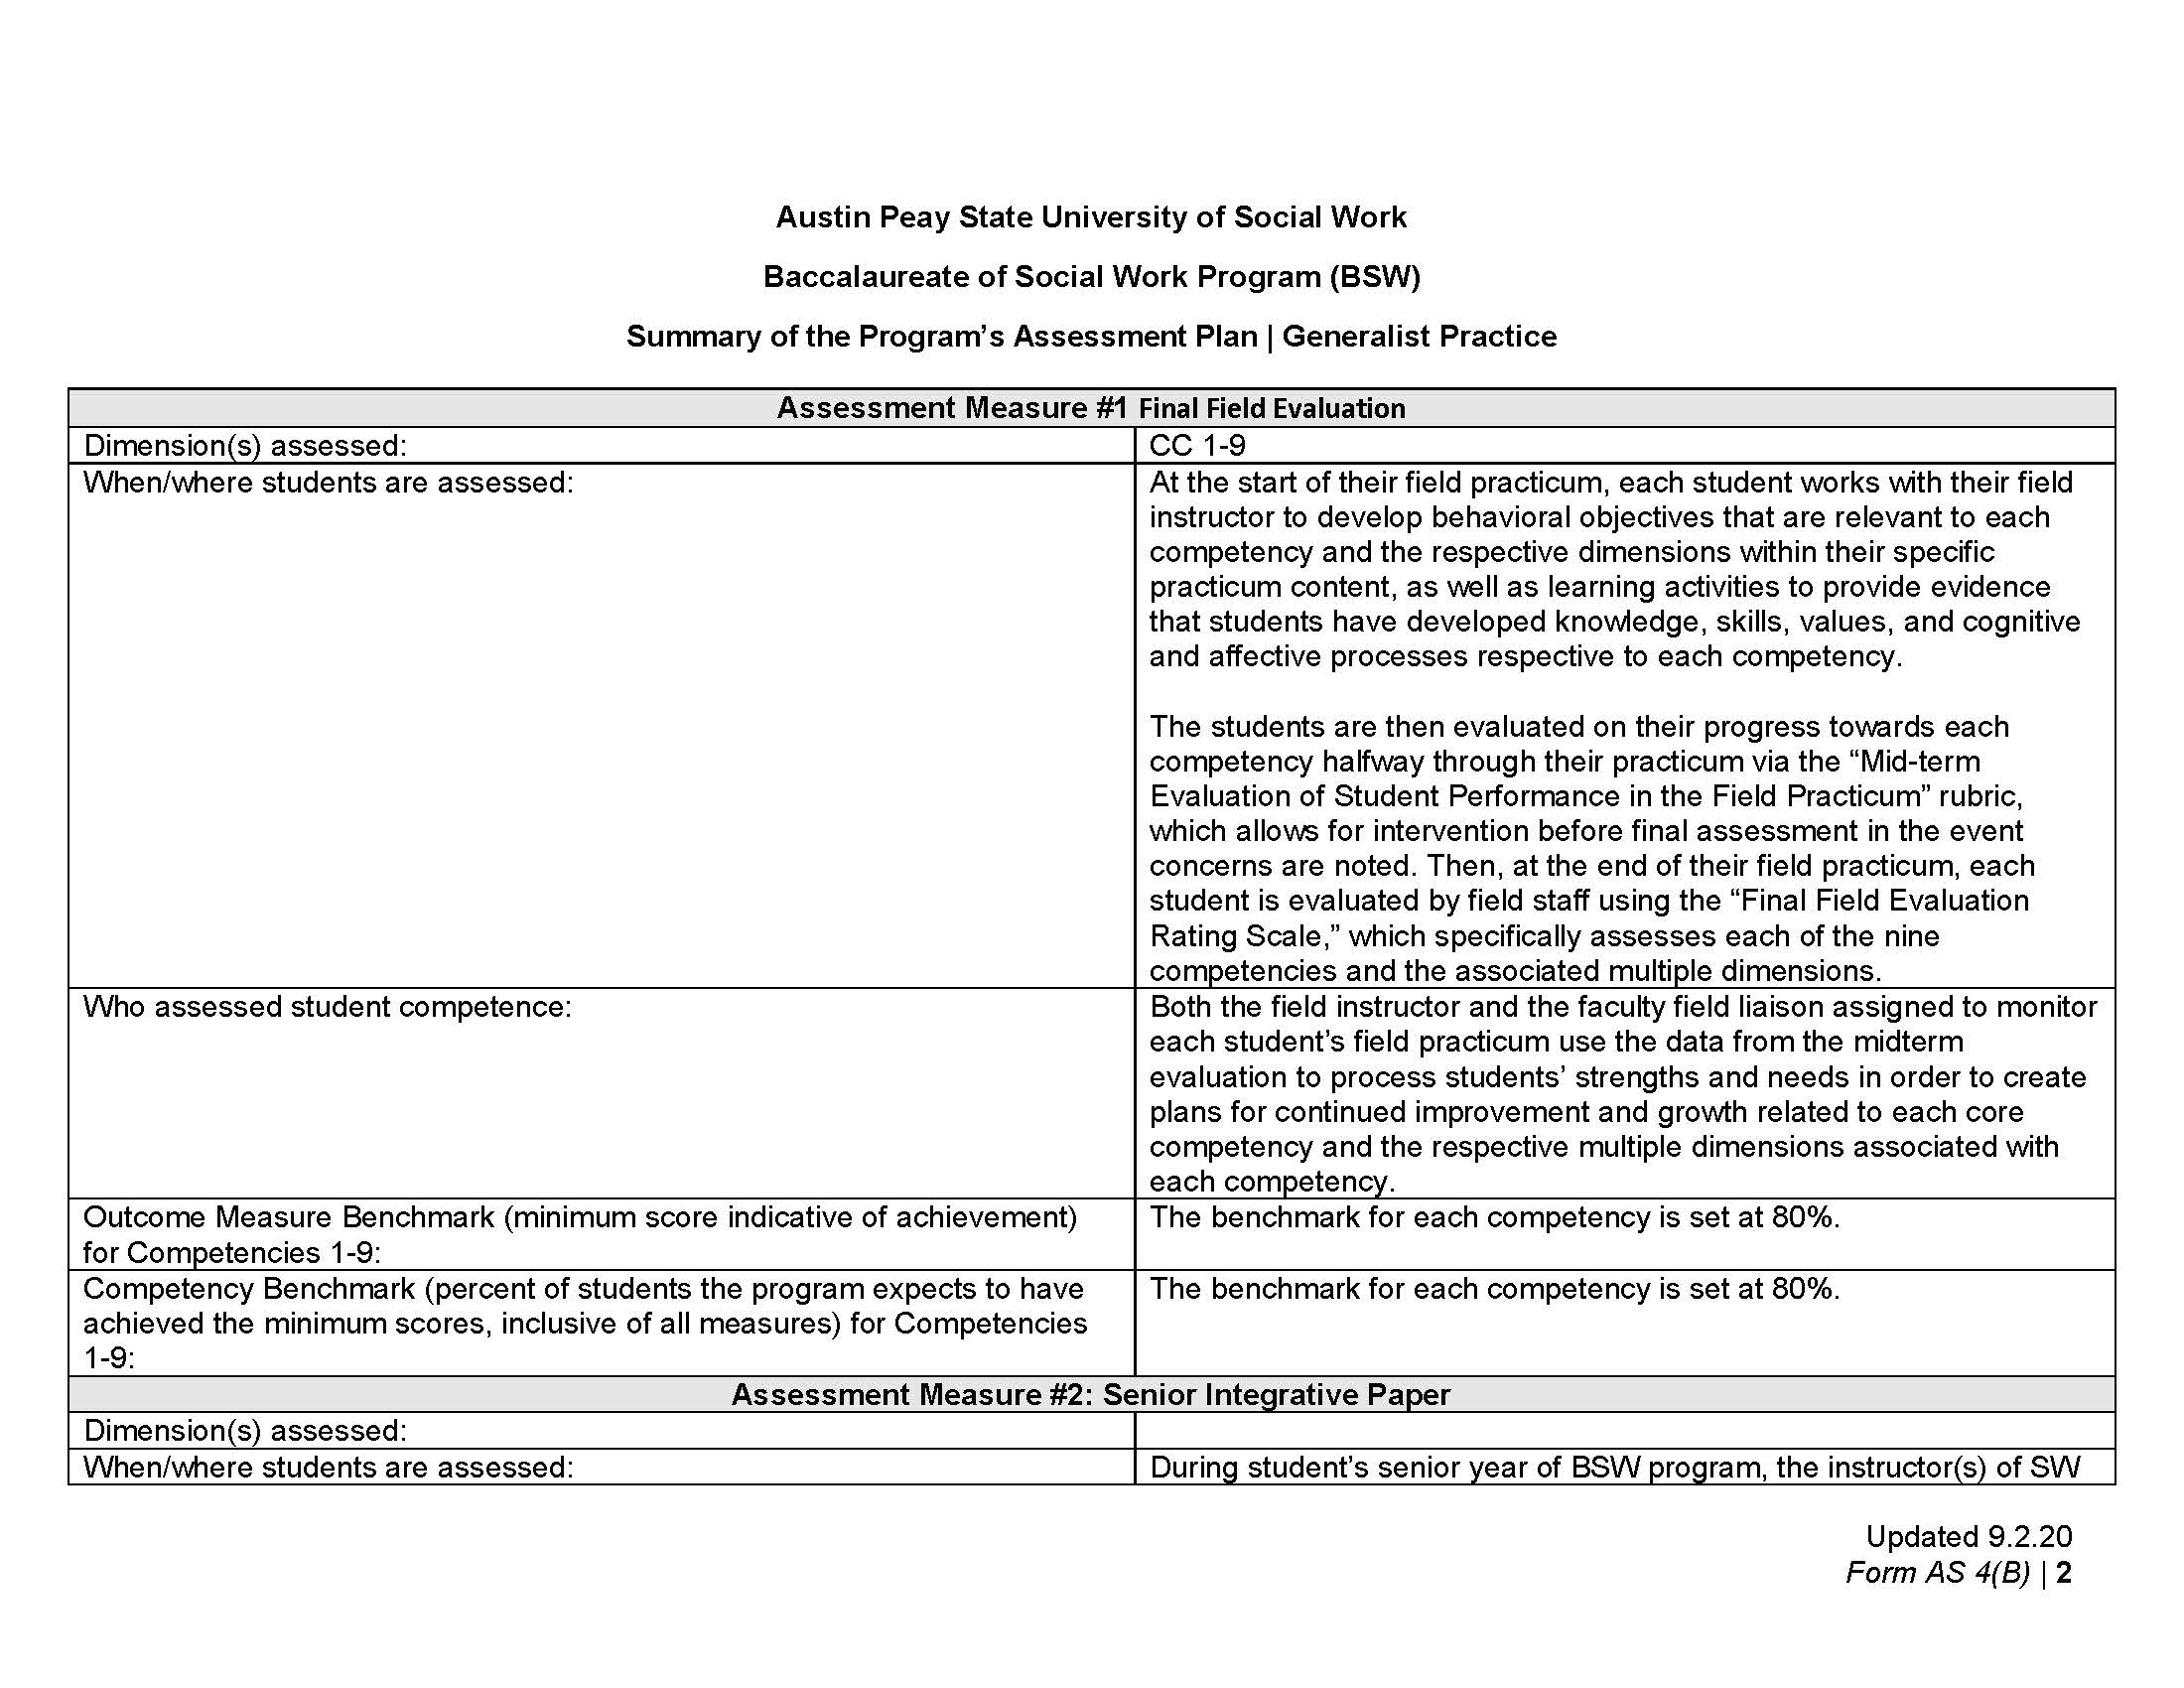 BSW Assessment Outcomes Page 2